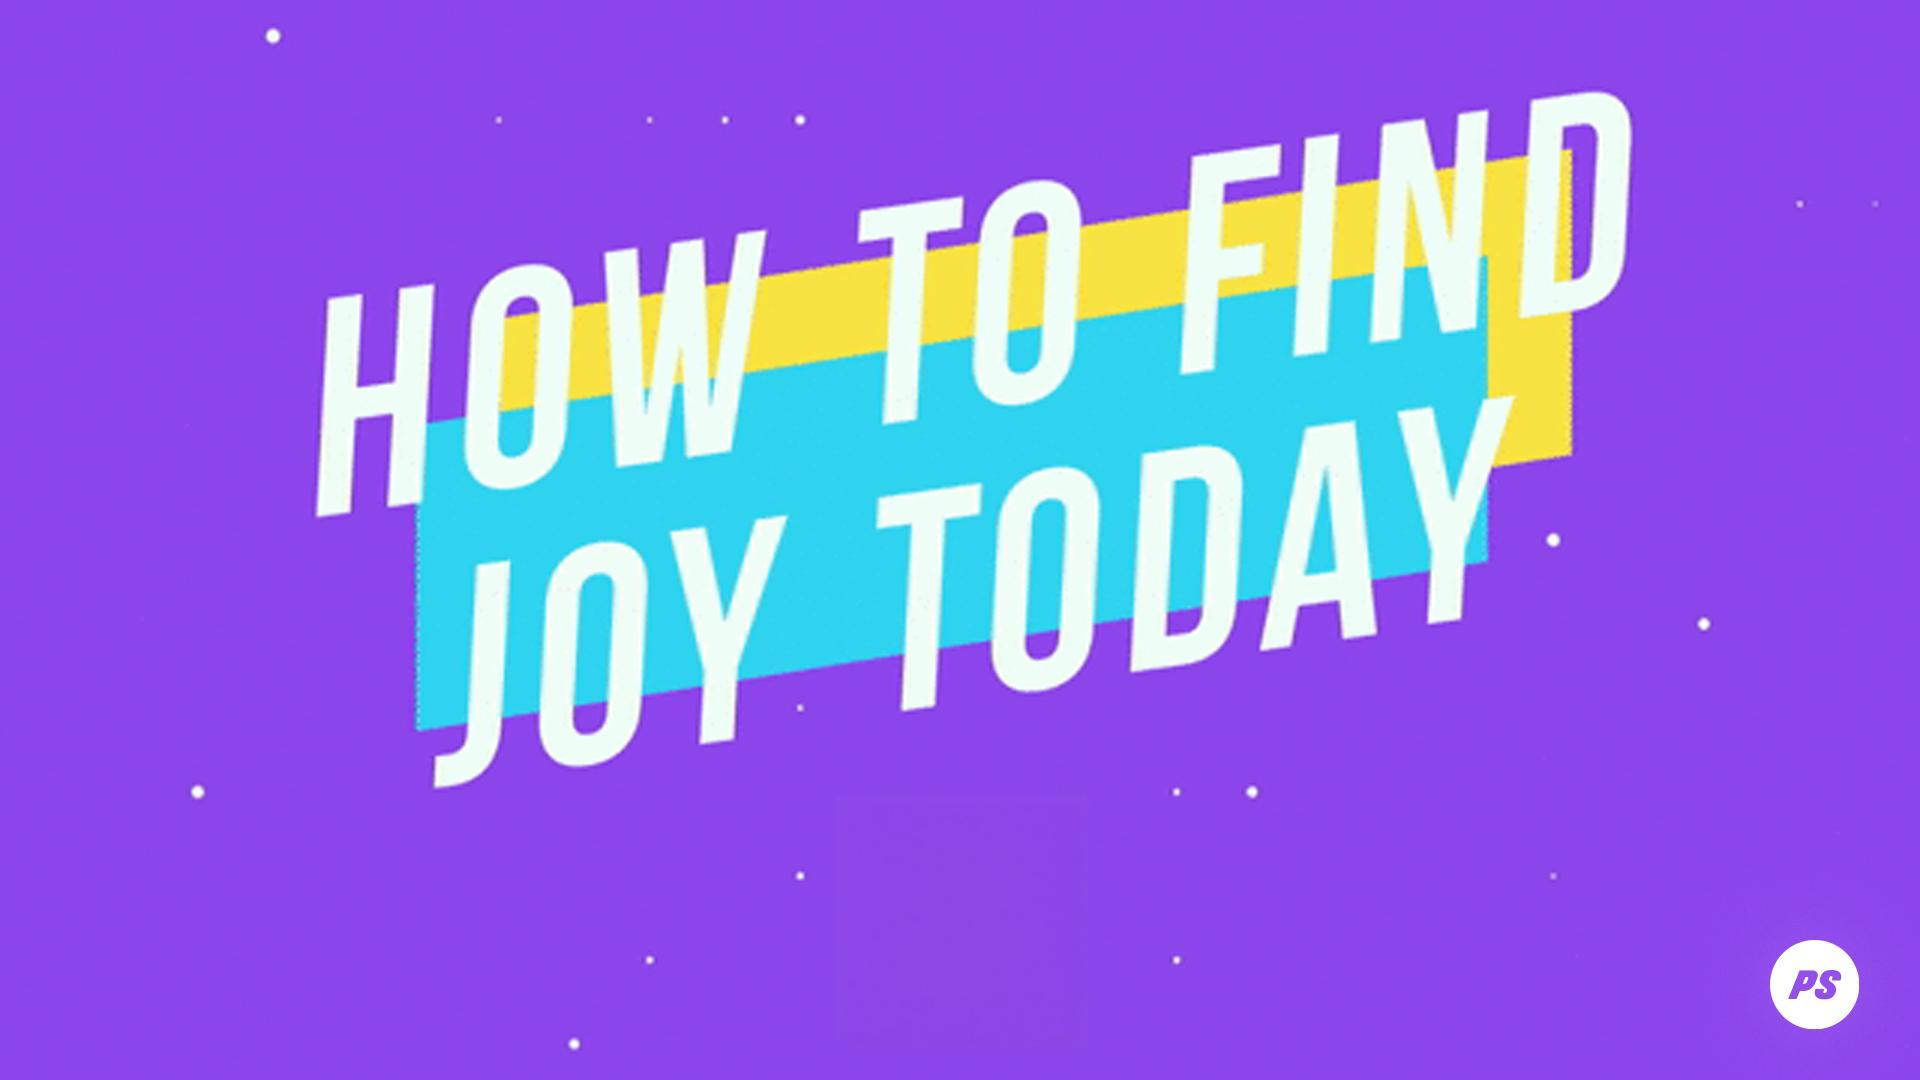 Featured image for “How to find joy today?”